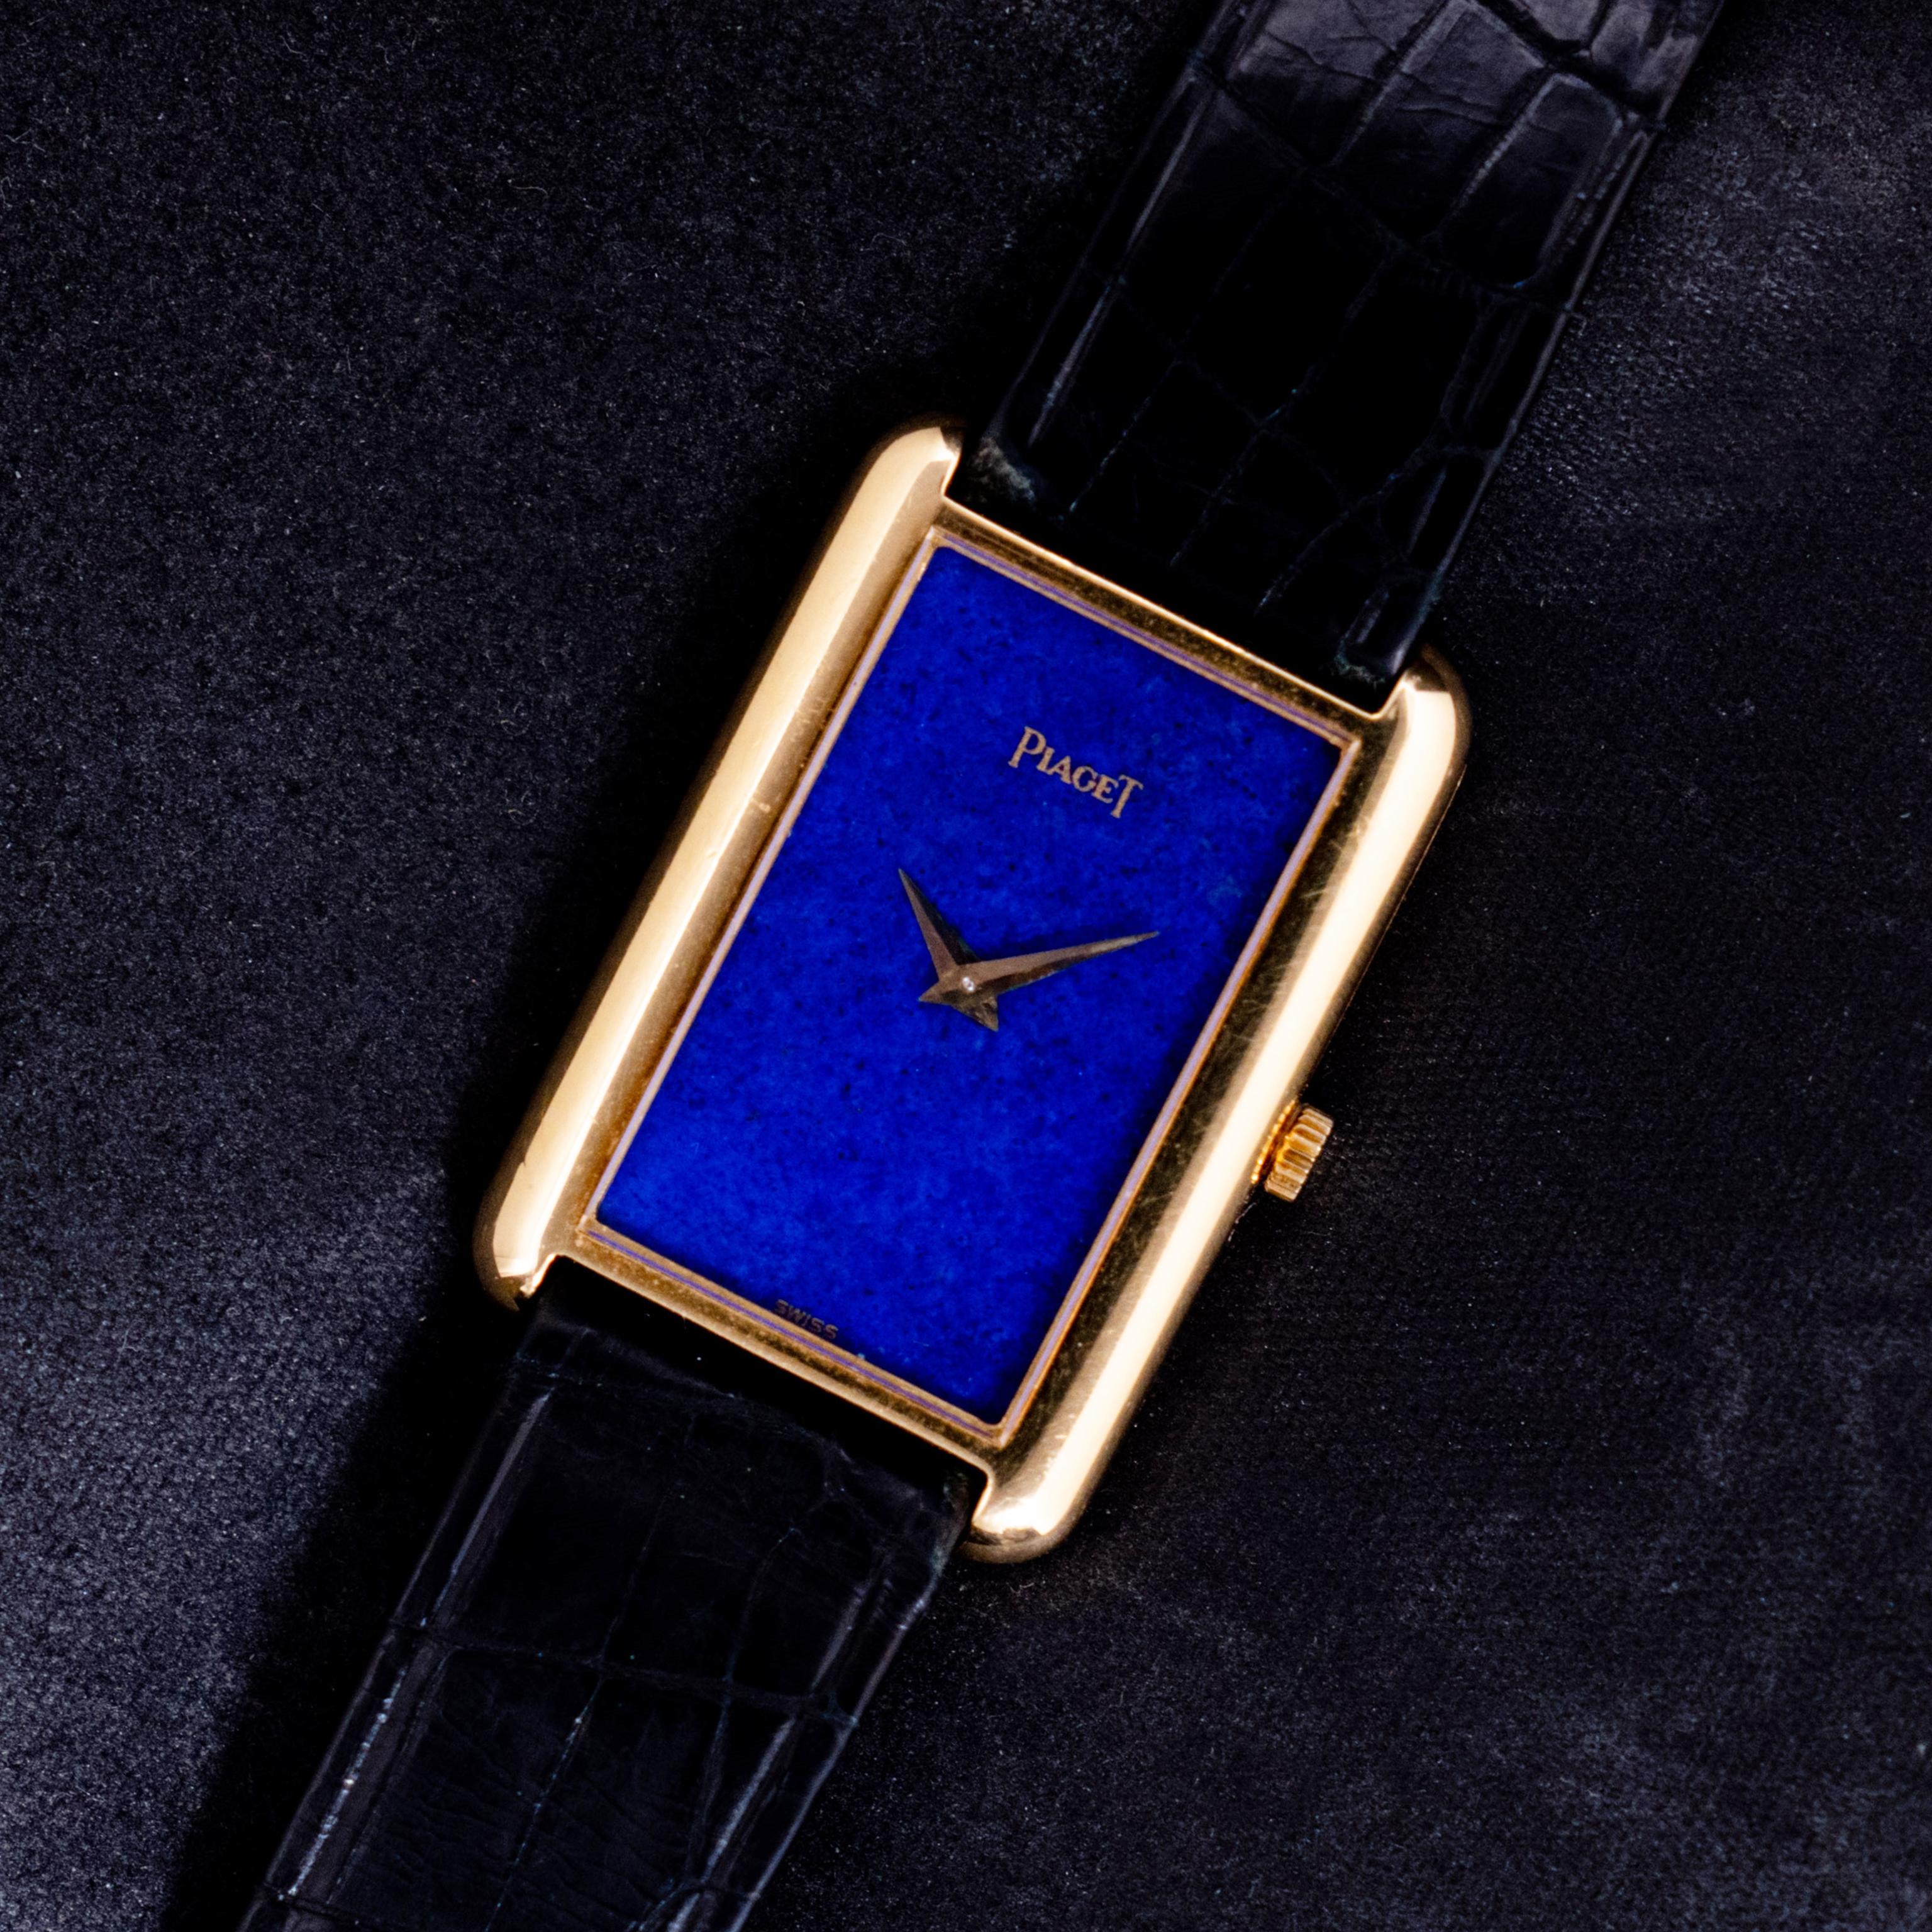 Brand: Piaget
Year: 1970s
Serial number: 6-79-xxx
Reference: C03955

In the 1960s, Piaget possessed a secret weapon that allowed them to create slim dress watches for men and introduce a new aesthetic for women. Their innovative calibre was not only